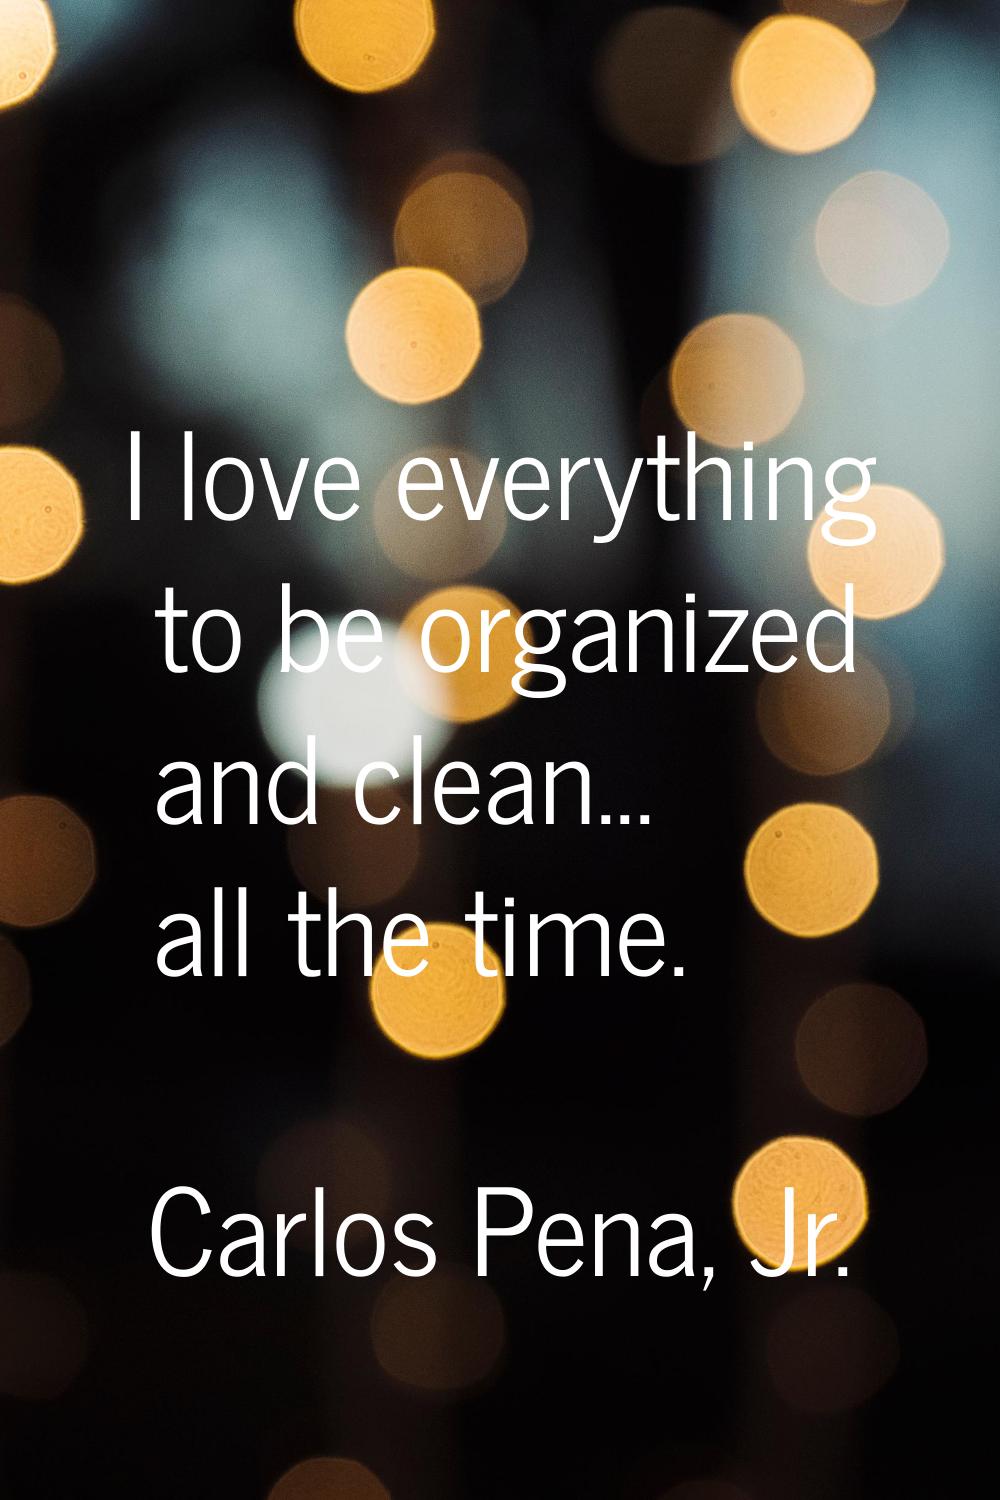 I love everything to be organized and clean... all the time.